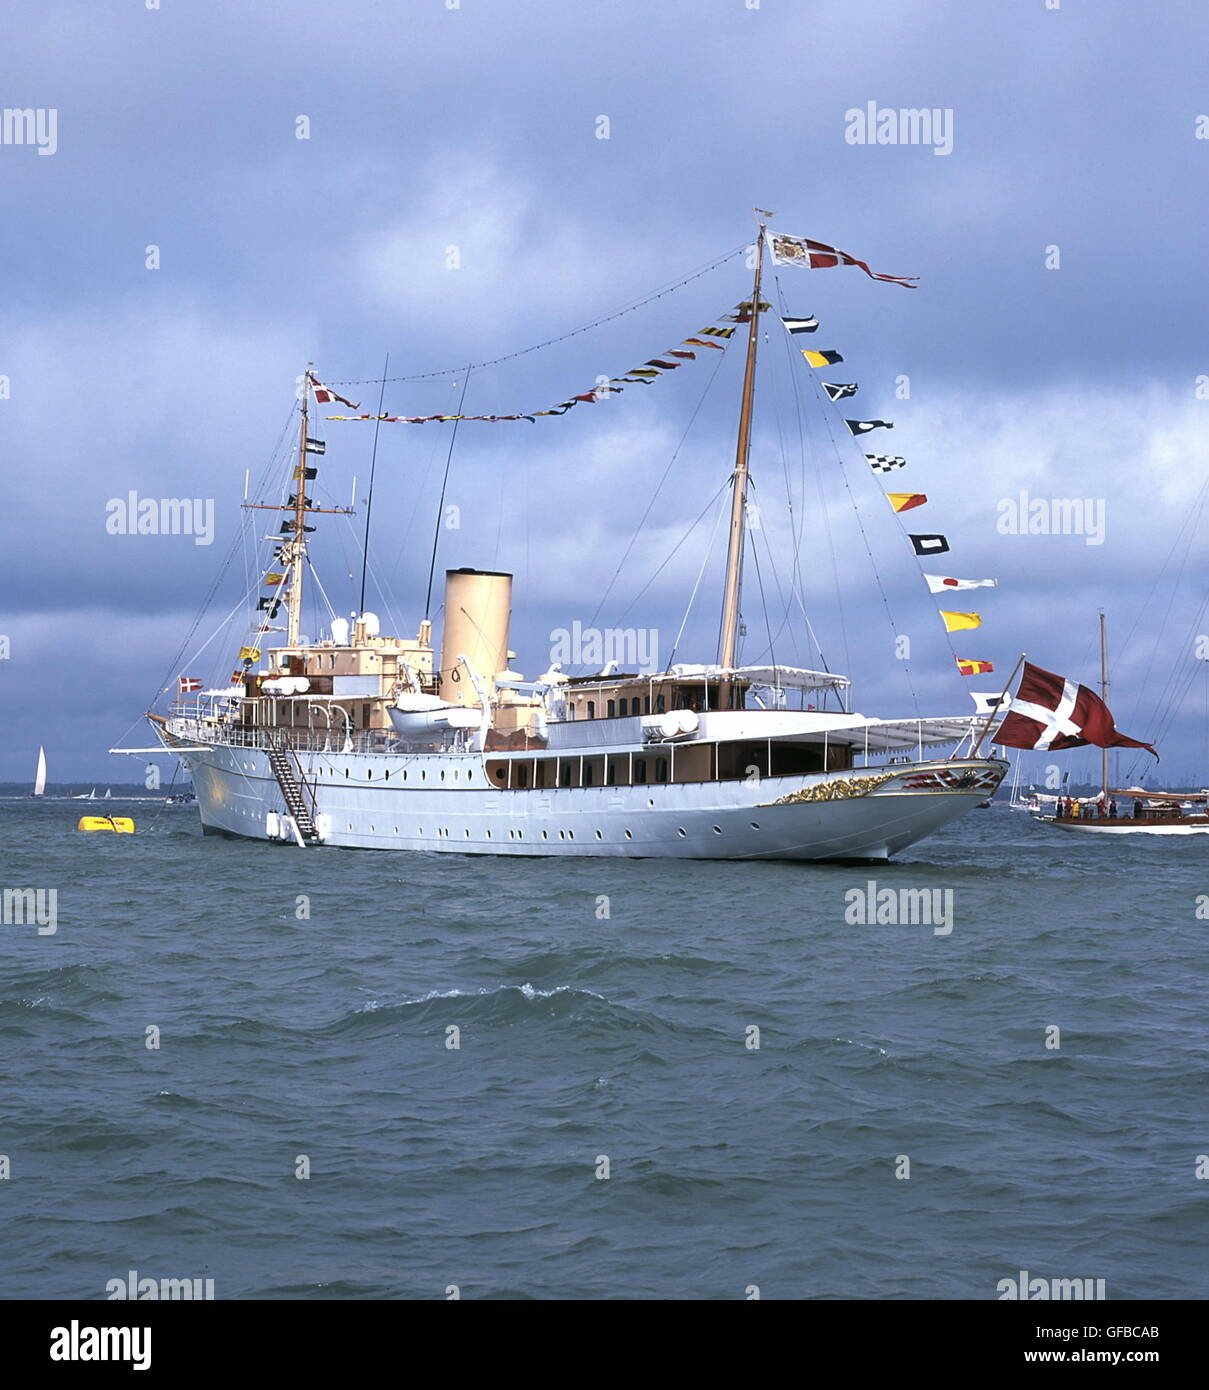 AJAXNETPHOTO. 19TH AUGUST, 2001, COWES, ENGLAND. - DANISH ROYAL YACHT - HDMY DANNEBROG DRESSED OVERALL, ANCHORED OFF COWES DURING THE AMERICA'S CUP SILVER JUBILEE EVENT. YACHT WAS LAUNCHD BY QUEEN ALEXANDRINE IN 1931.  PHOTO:JONATHAN EASTLAND/AJAX  REF:190801 18 Stock Photo